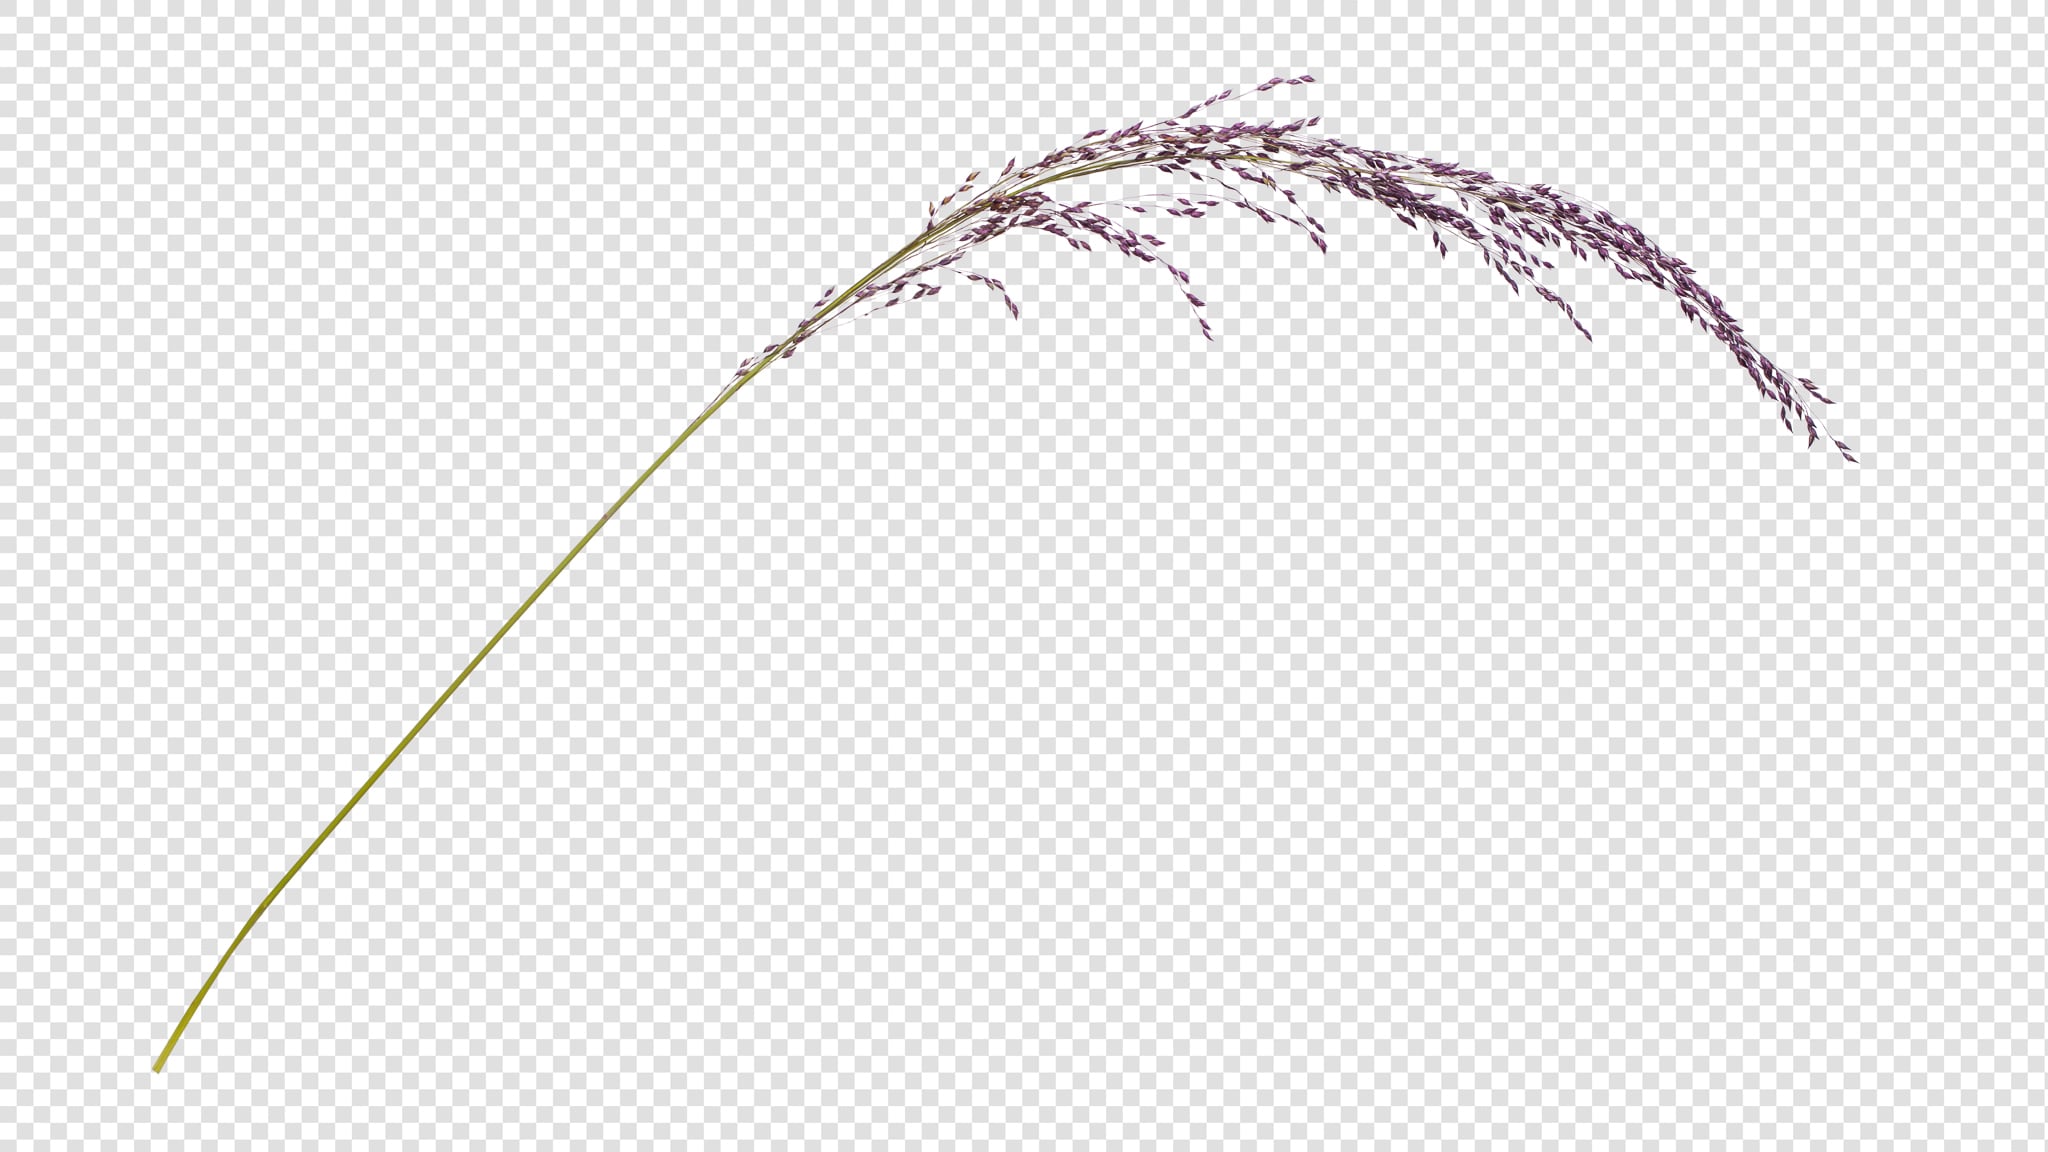 Spikelet PSD image with transparent background